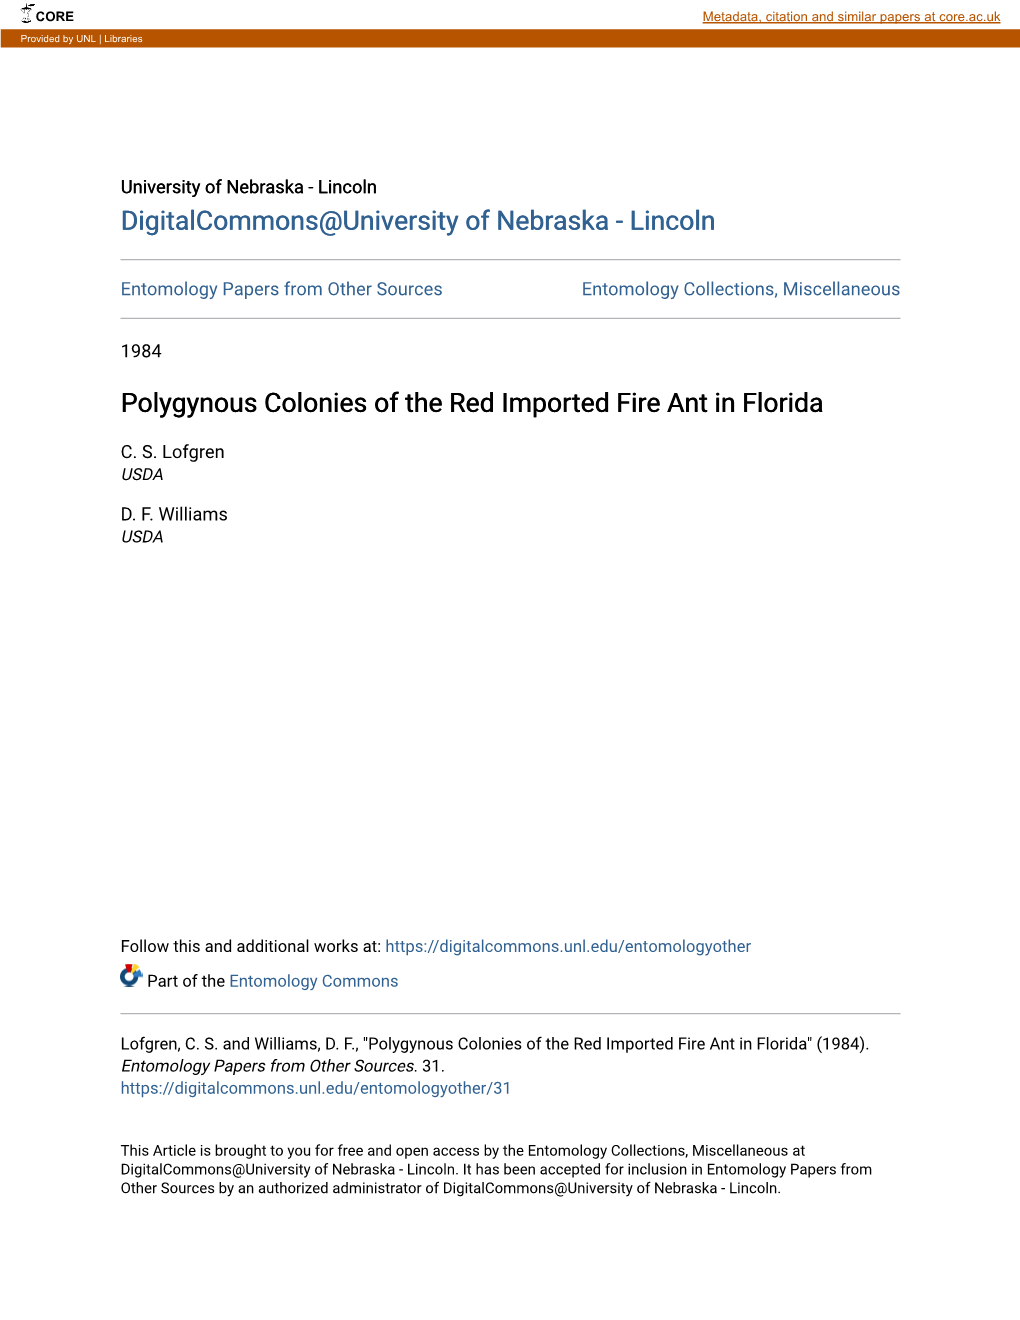 Polygynous Colonies of the Red Imported Fire Ant in Florida